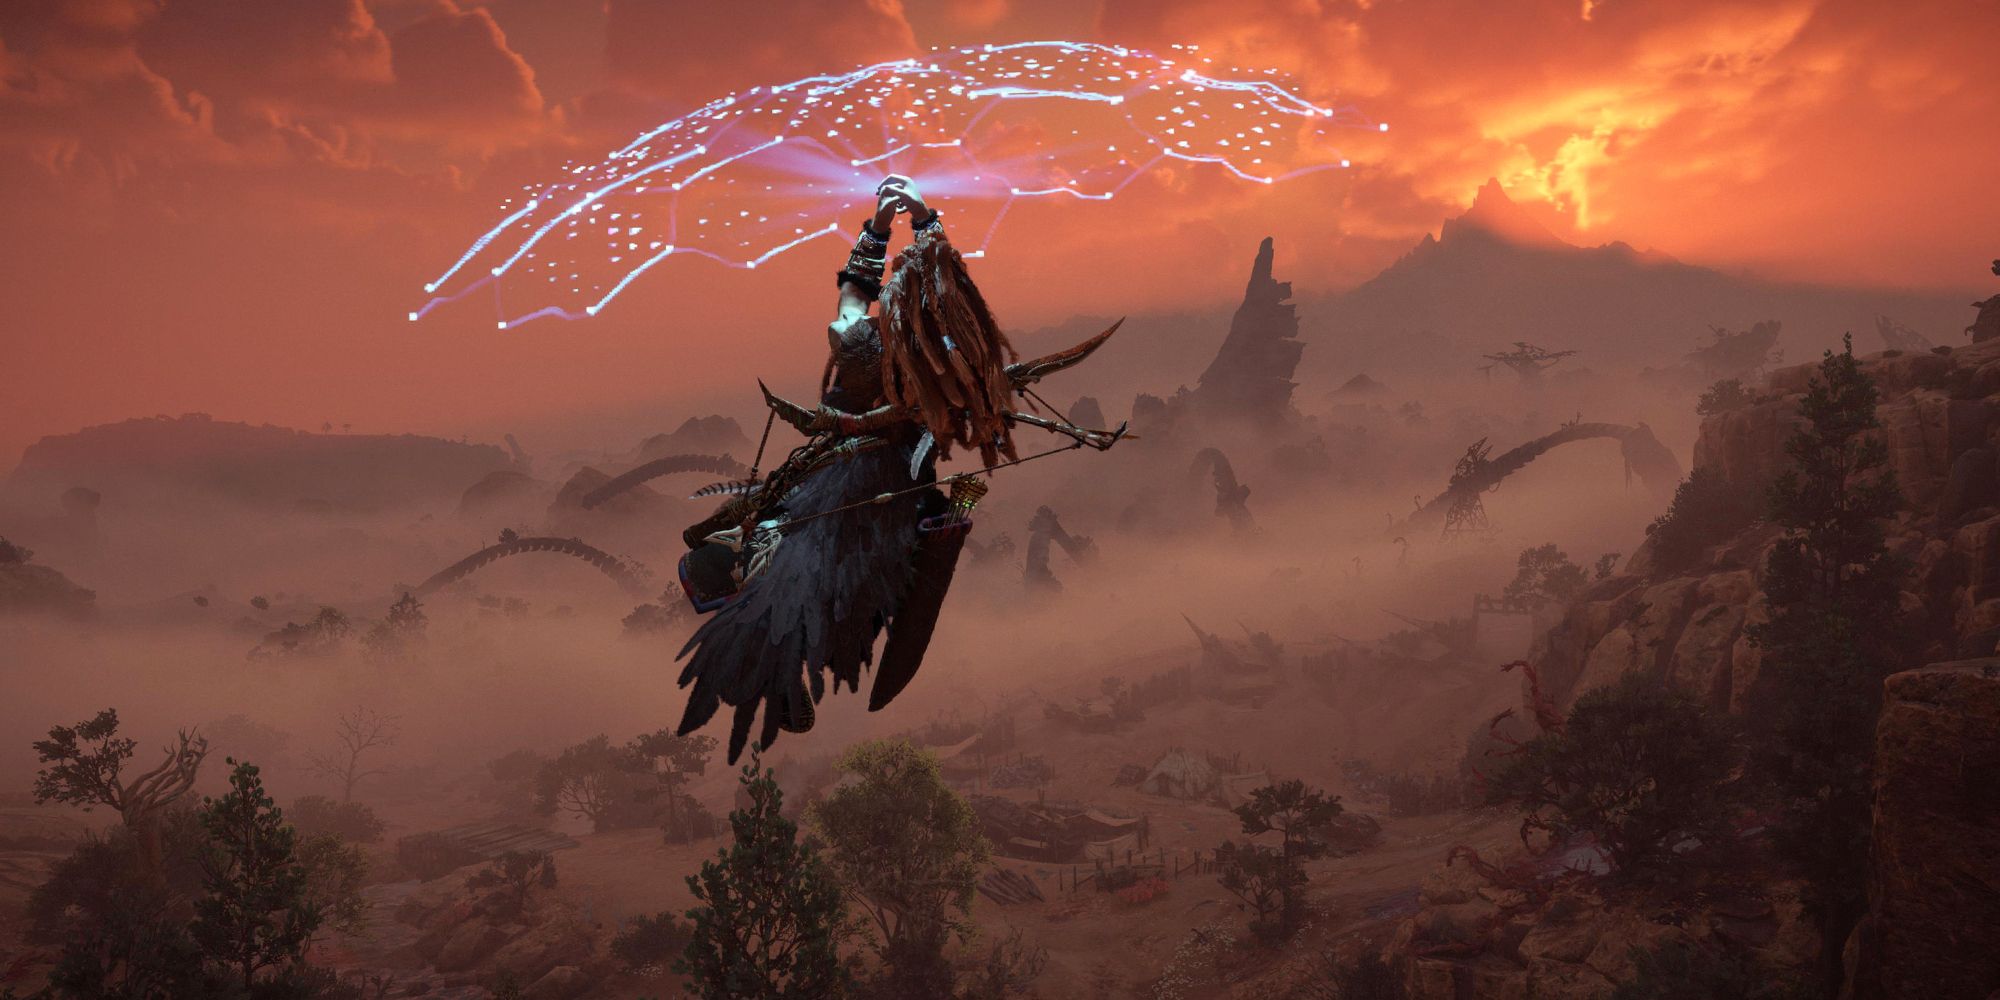 Horizon: Forbidden West Aloy using Shieldwing to glide down to the ground. Sunset in the distance.